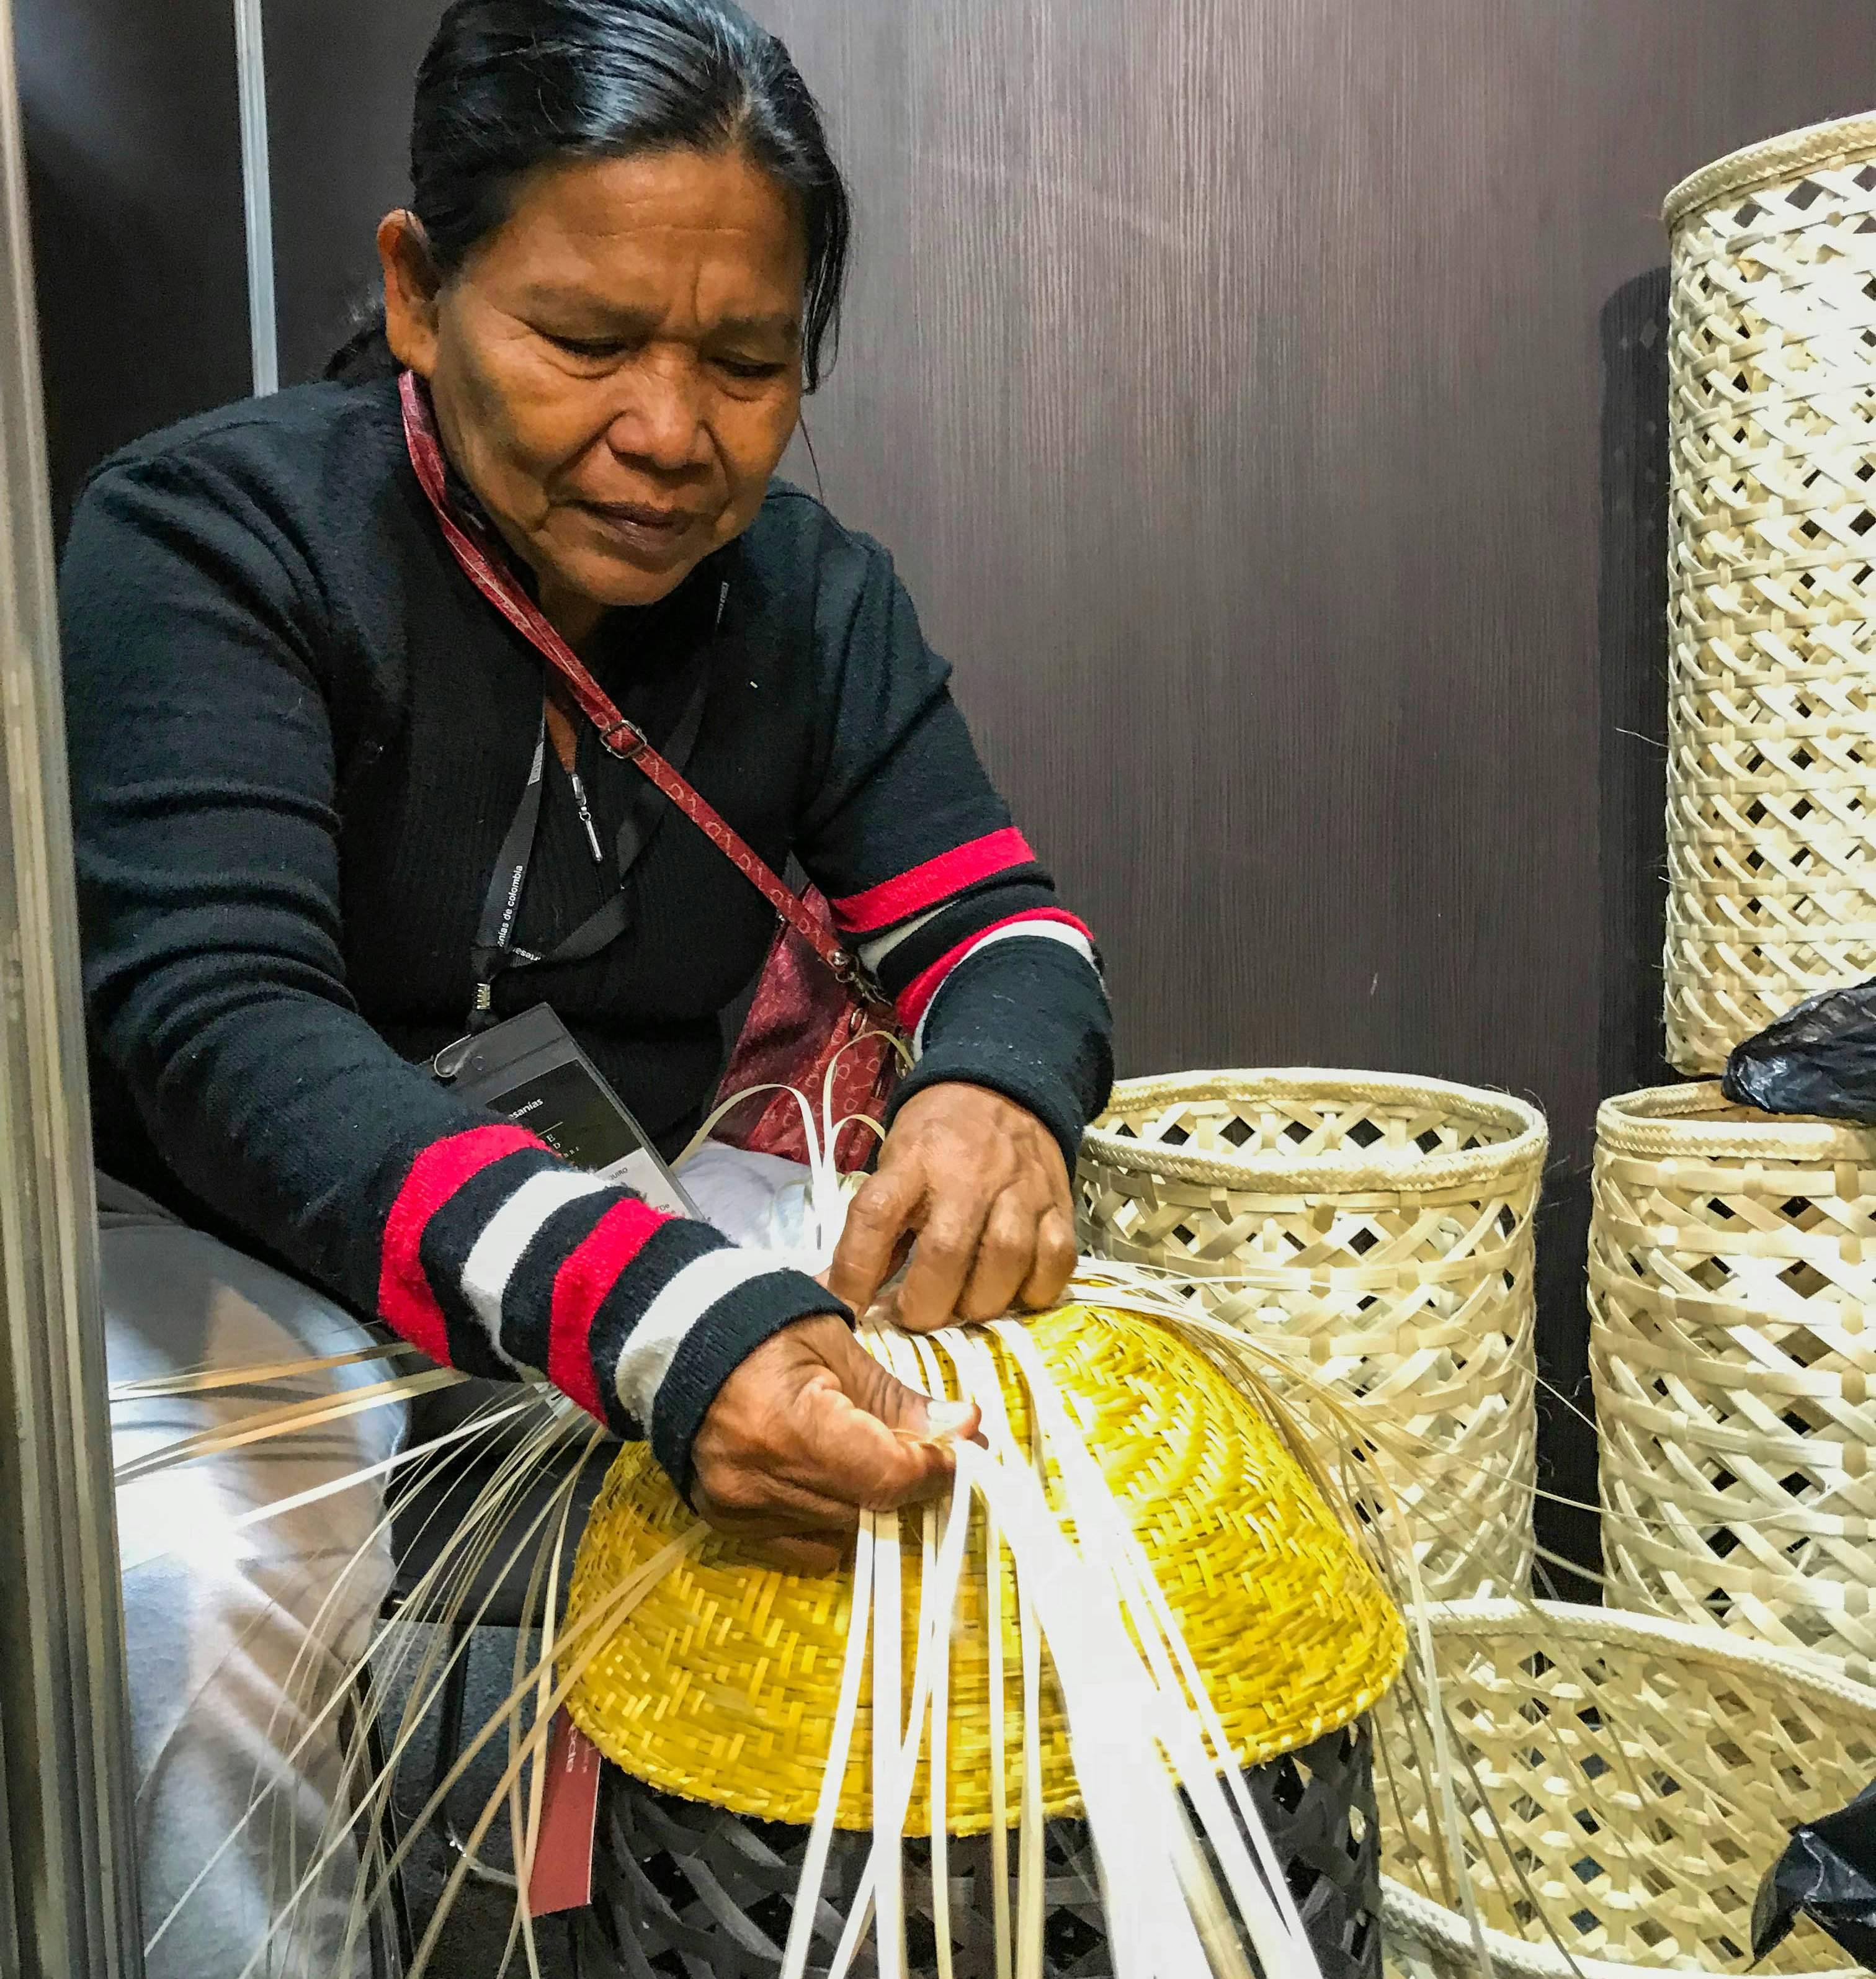 A woman with black hair and a black sweater with red and white stripes on the cuffs works on weaving a basket out of several flat strands of a pale material. To the right of her and the basket she is working on are several finished pieces, tall cylindrical baskets with a diamond pattern to them